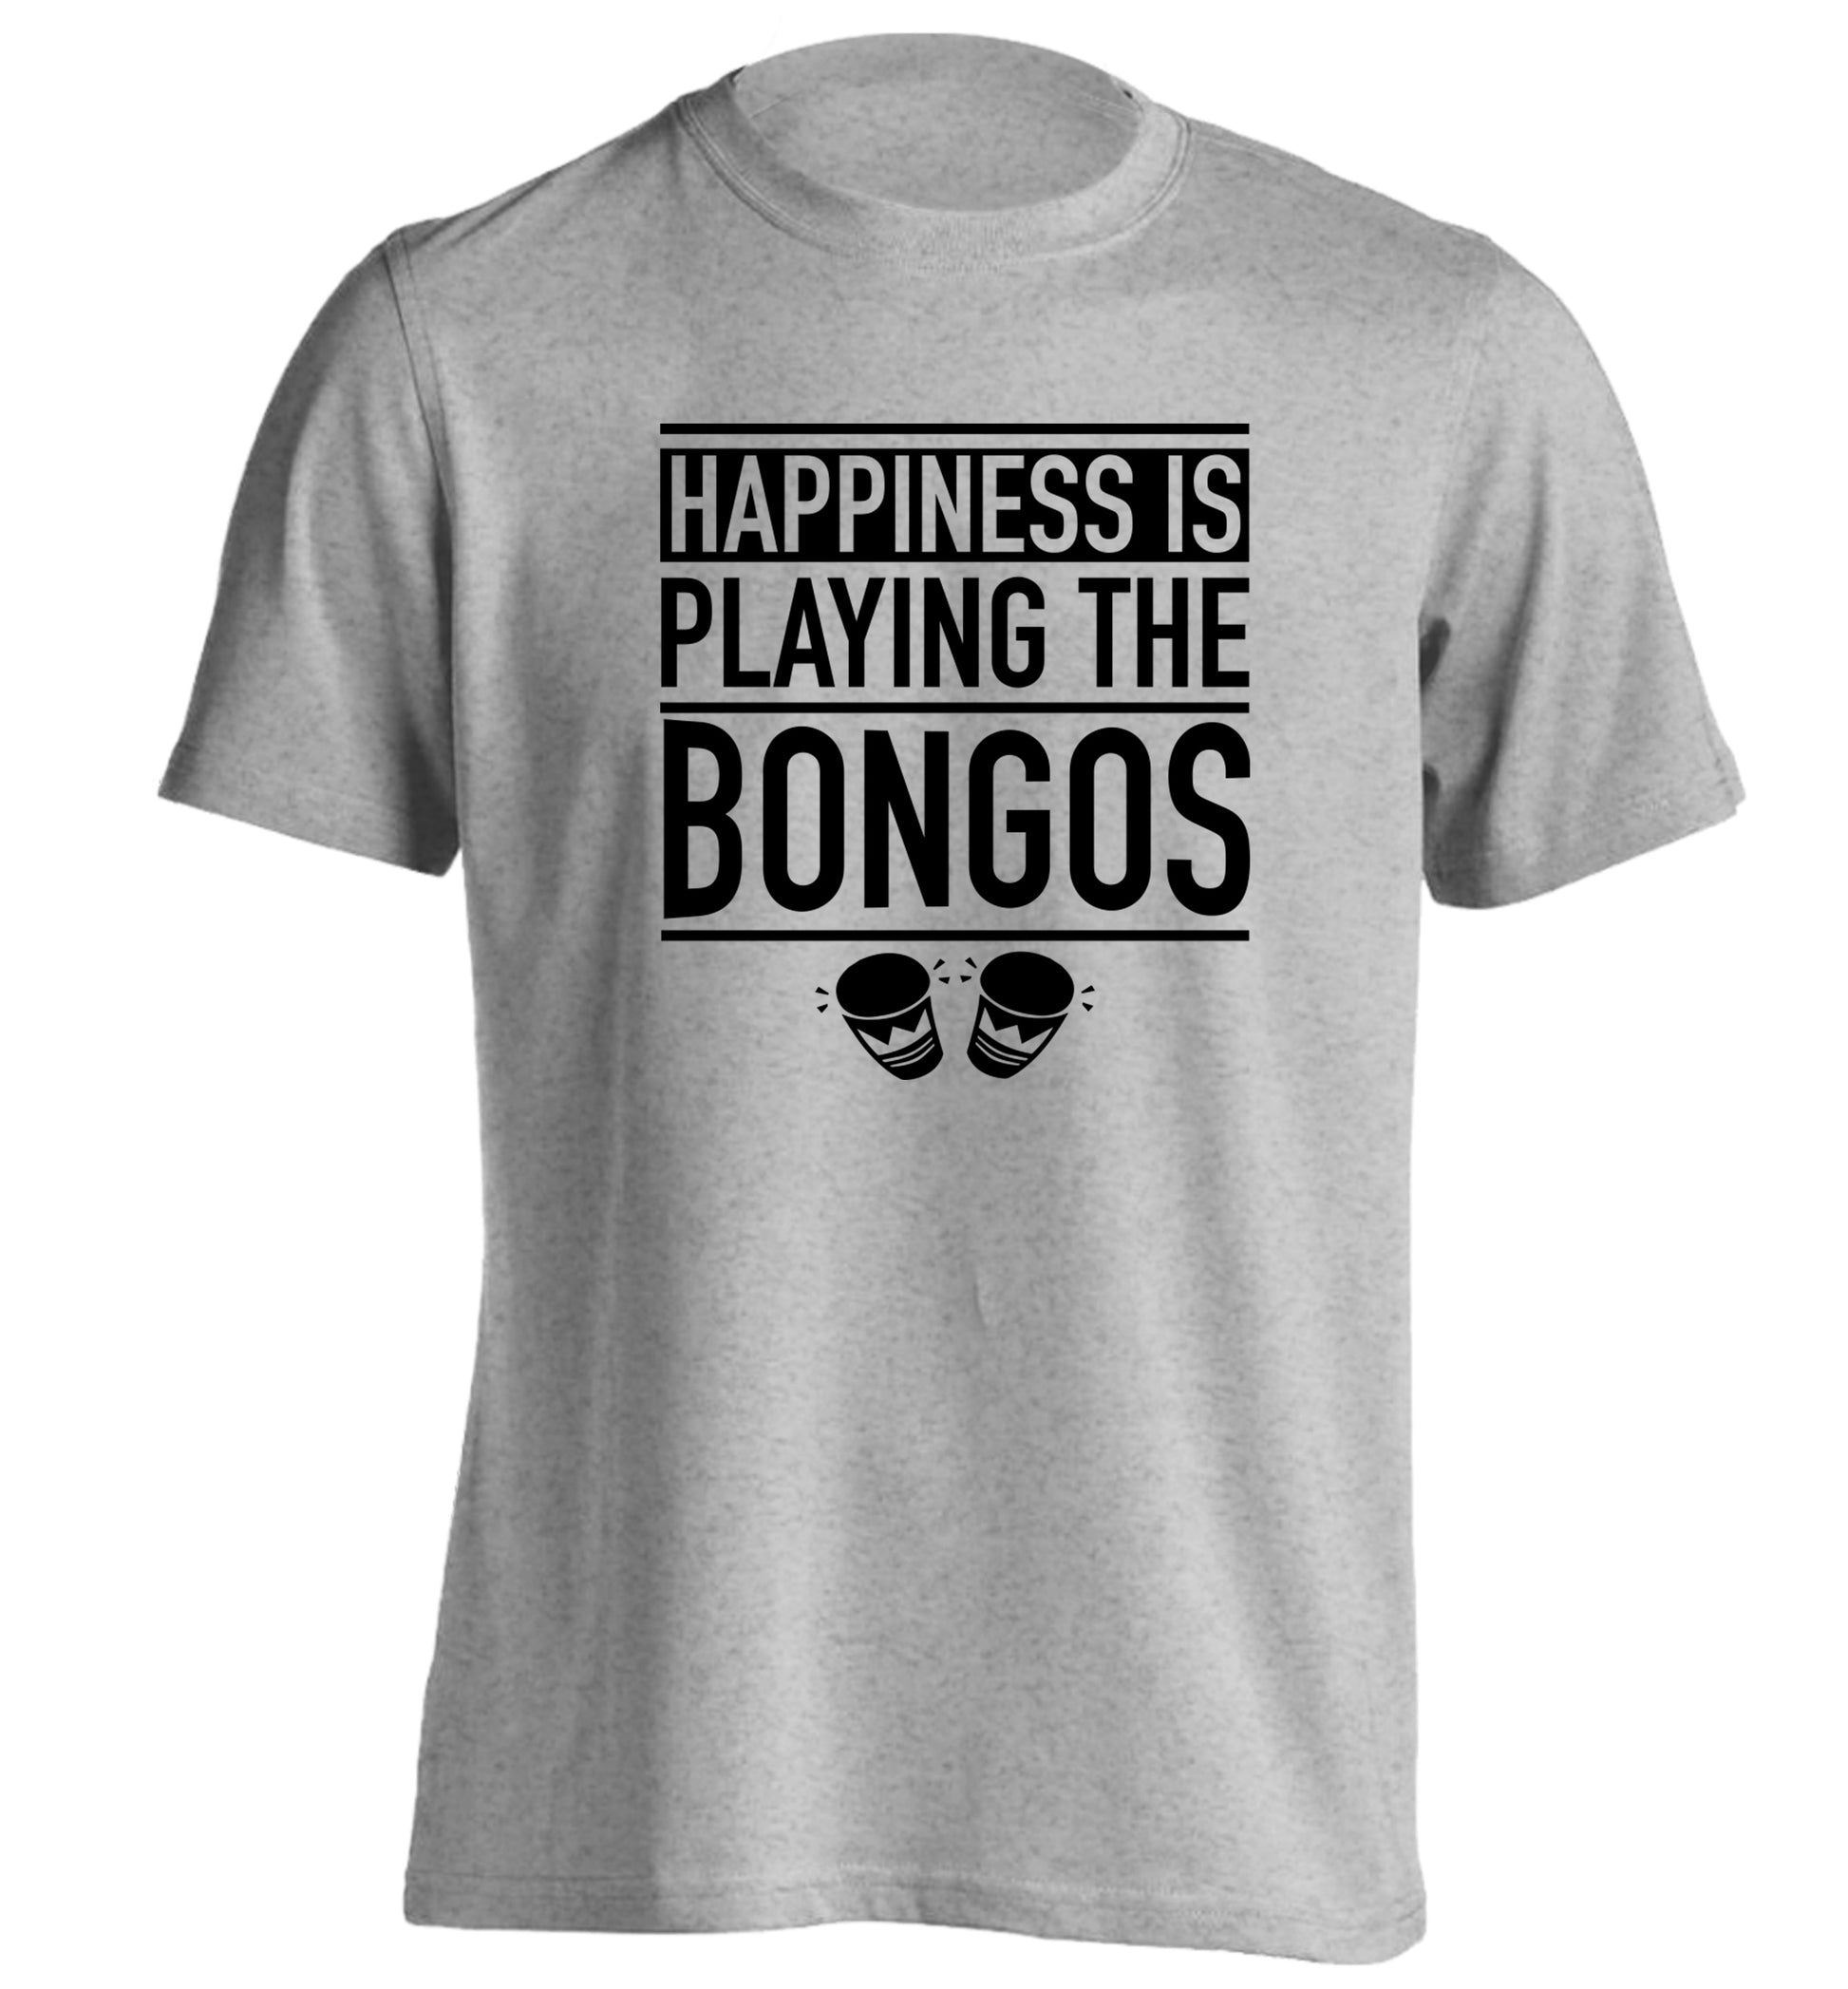 Happiness is playing the bongos adults unisex grey Tshirt 2XL